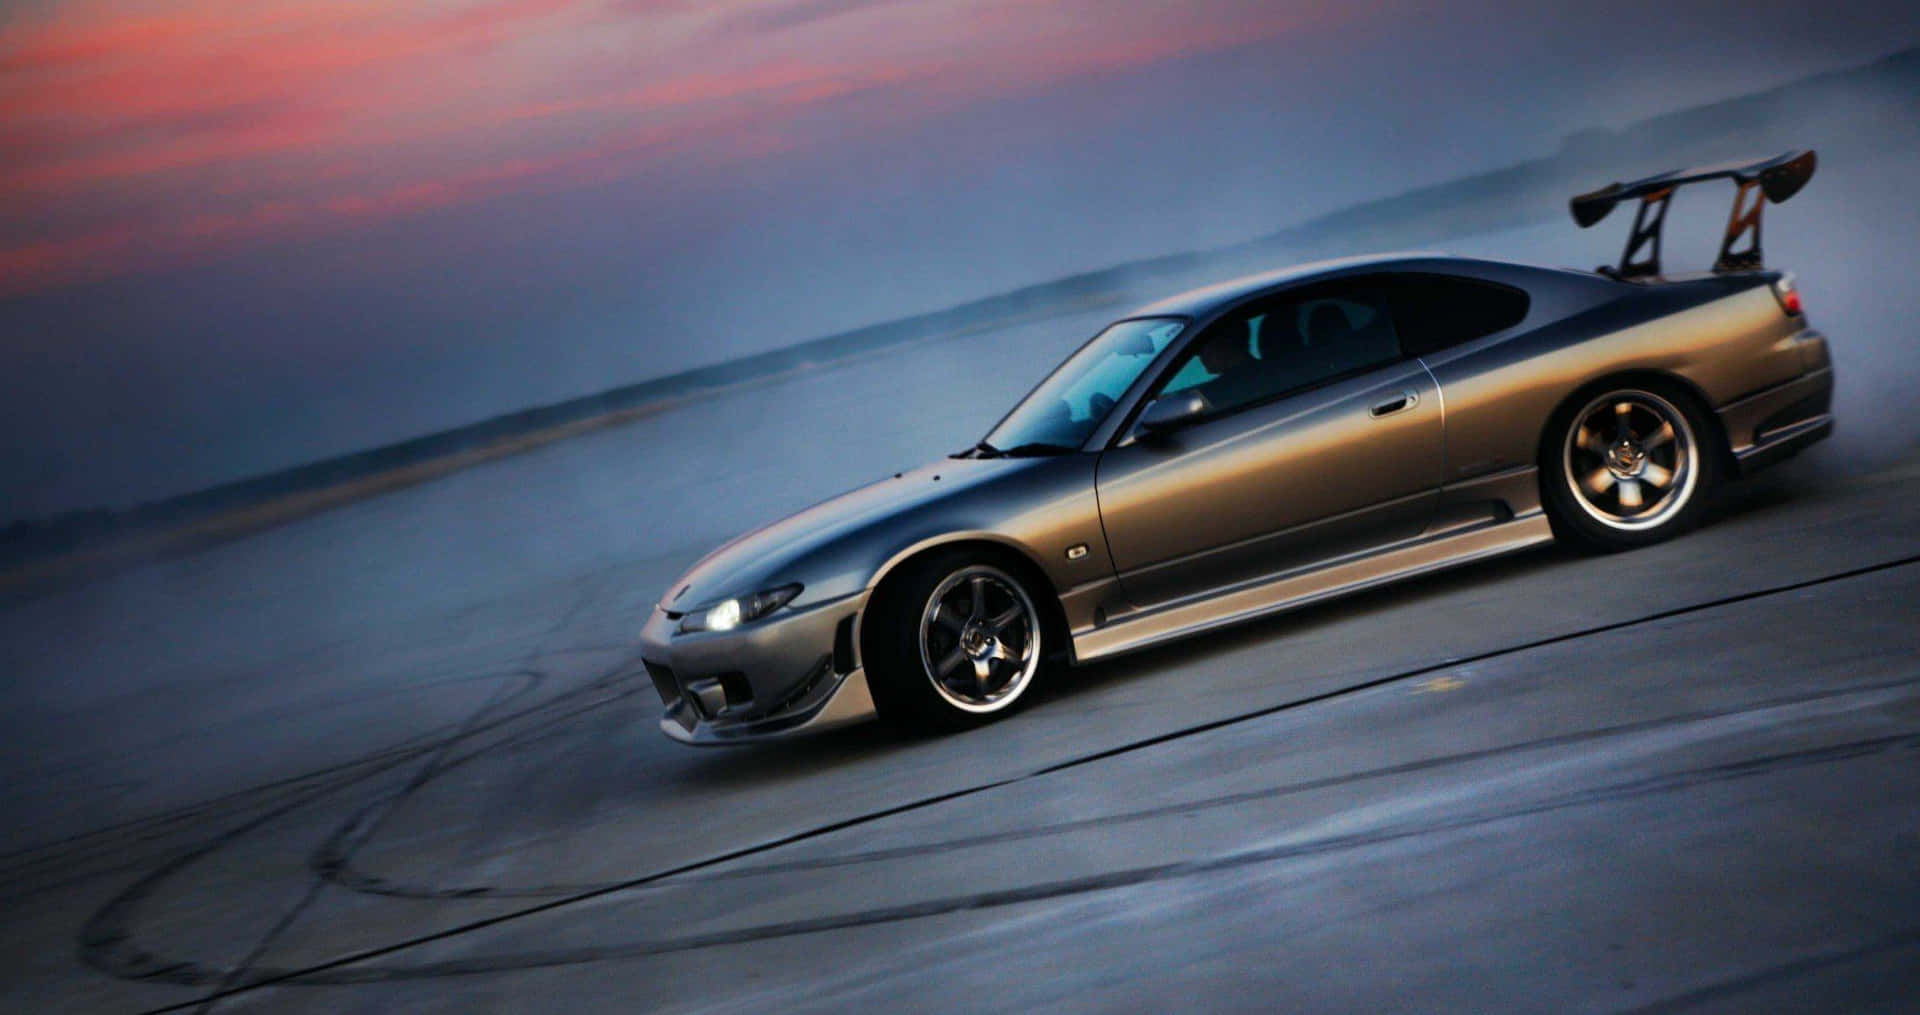 Awe-inspiring Nissan Silvia S15 in High Definition Wallpaper